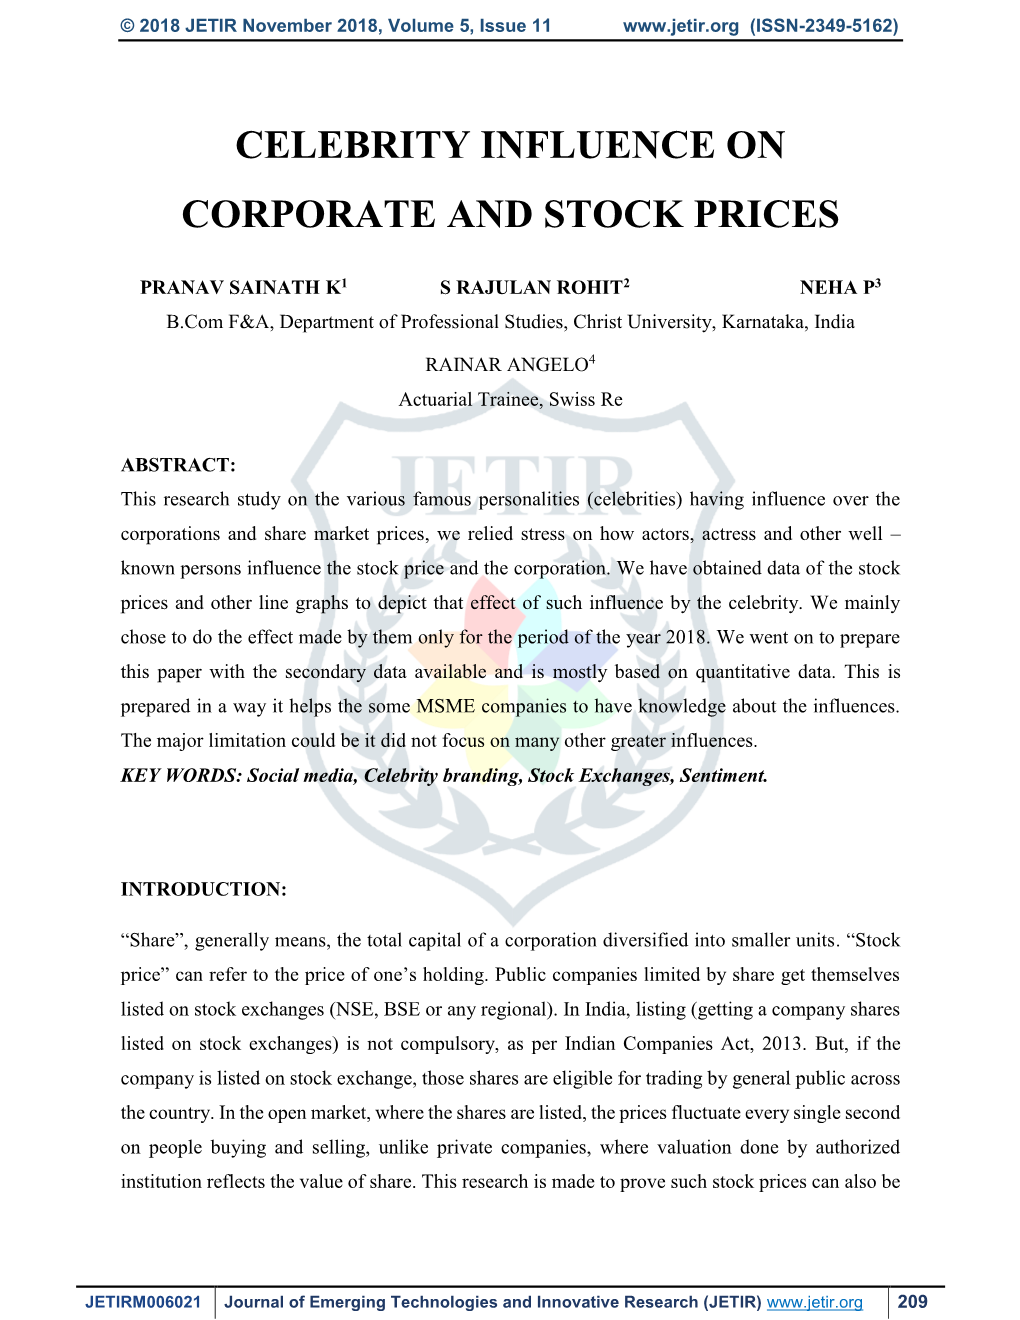 Celebrity Influence on Corporate and Stock Prices